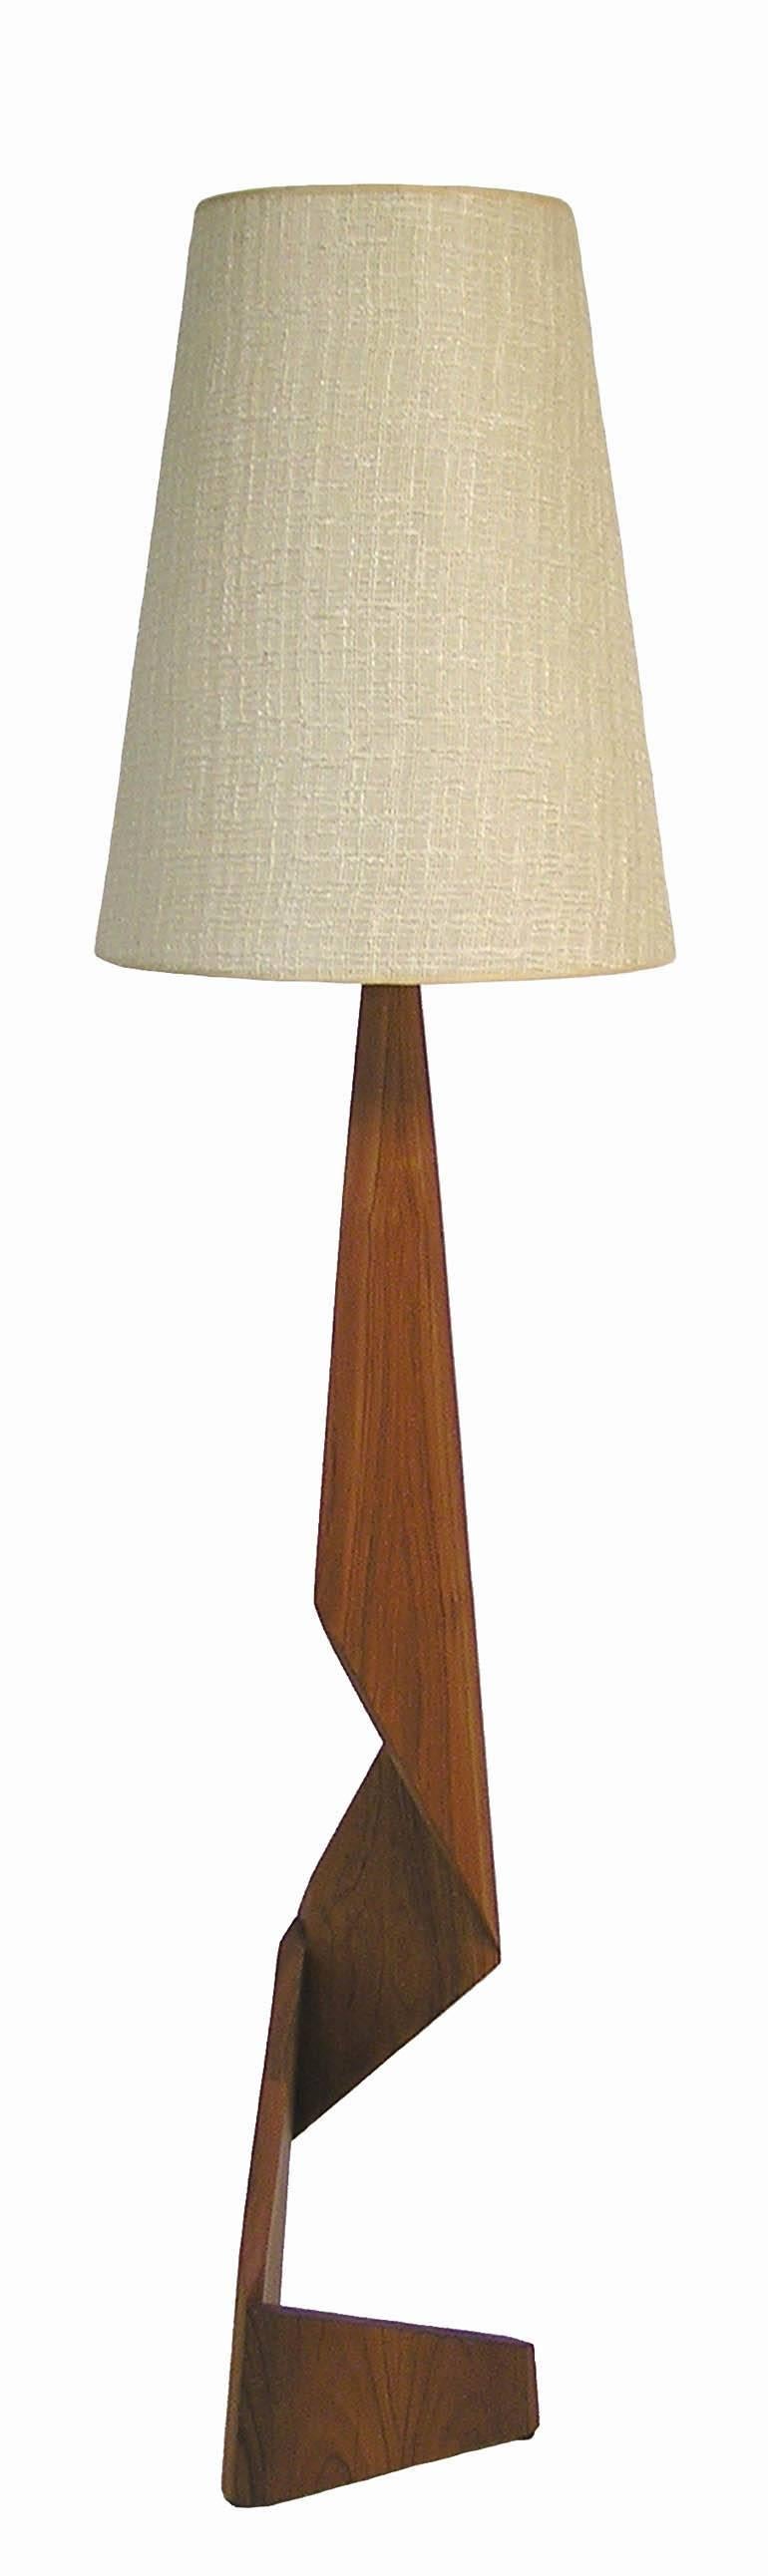 A pair of uniquely designed zig zag teak floor lamps from the 1960s Danish Mid-Century Modern era. Amazing craftsmanship throughout featuring a sculpted geometrical solid teak base with original conical shade and three-way light socket. Base of both